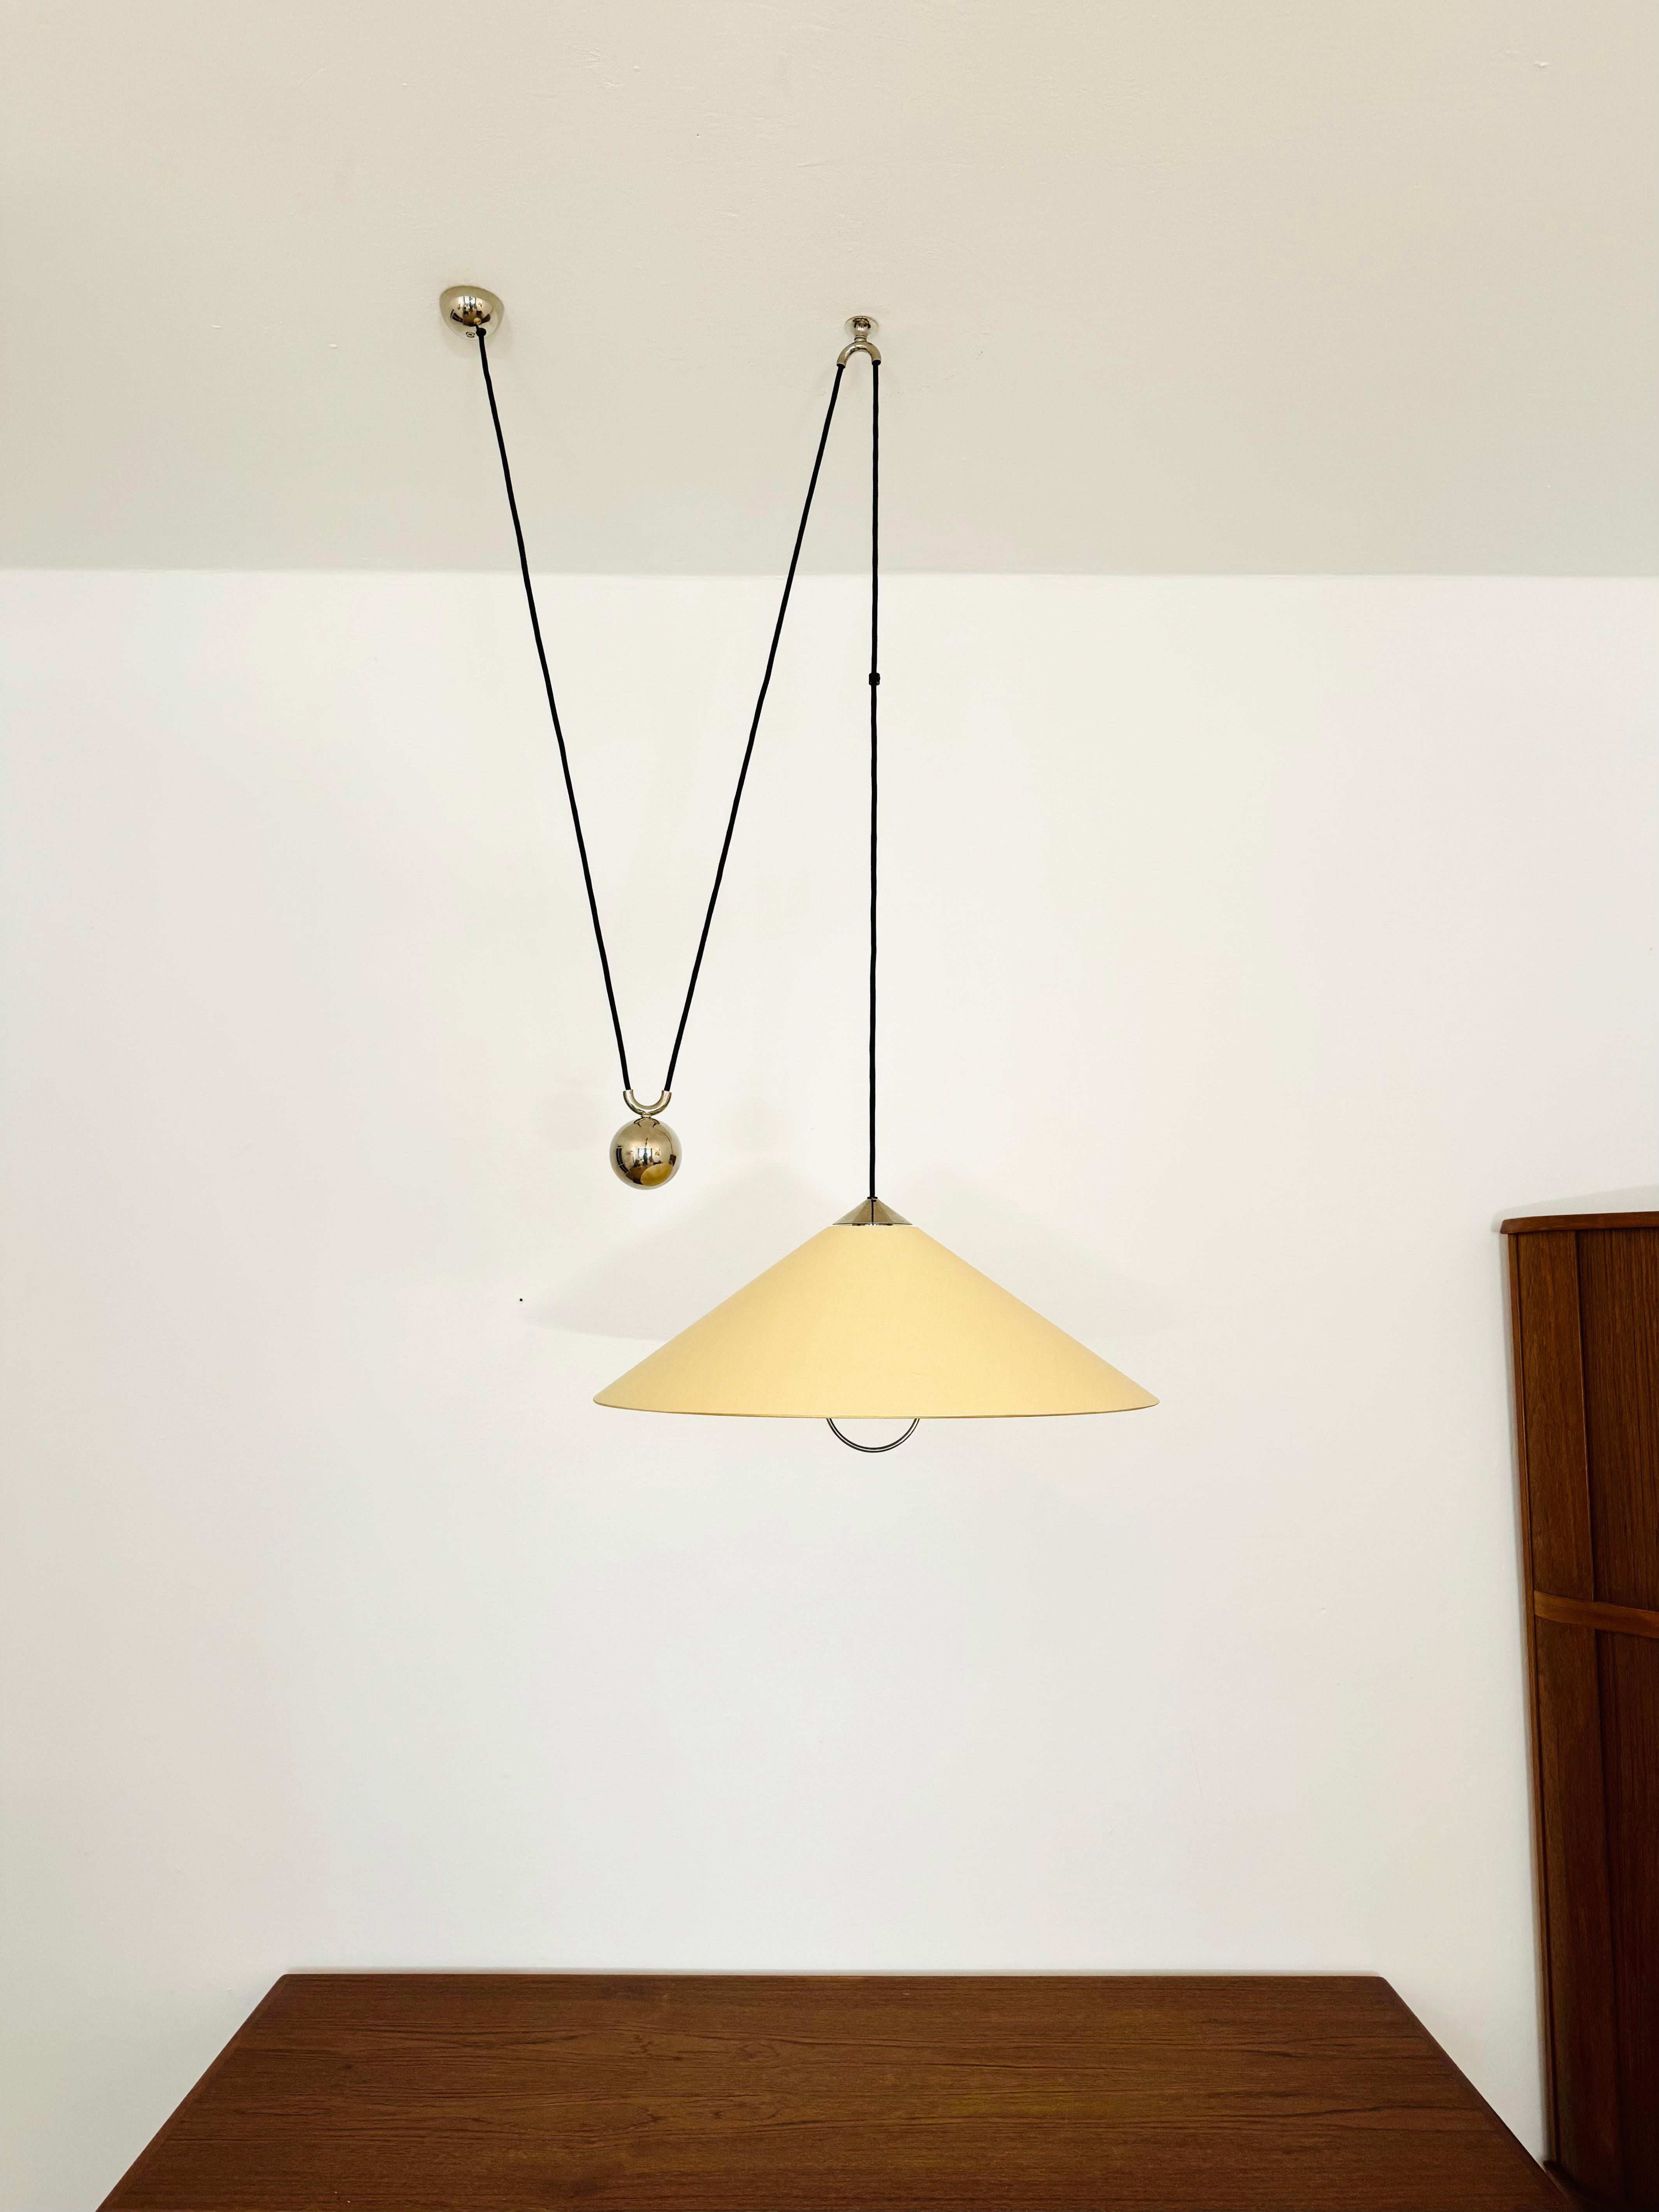 Large Adjustable Pendant Lamp with Counterweight by Florian Schulz For Sale 1